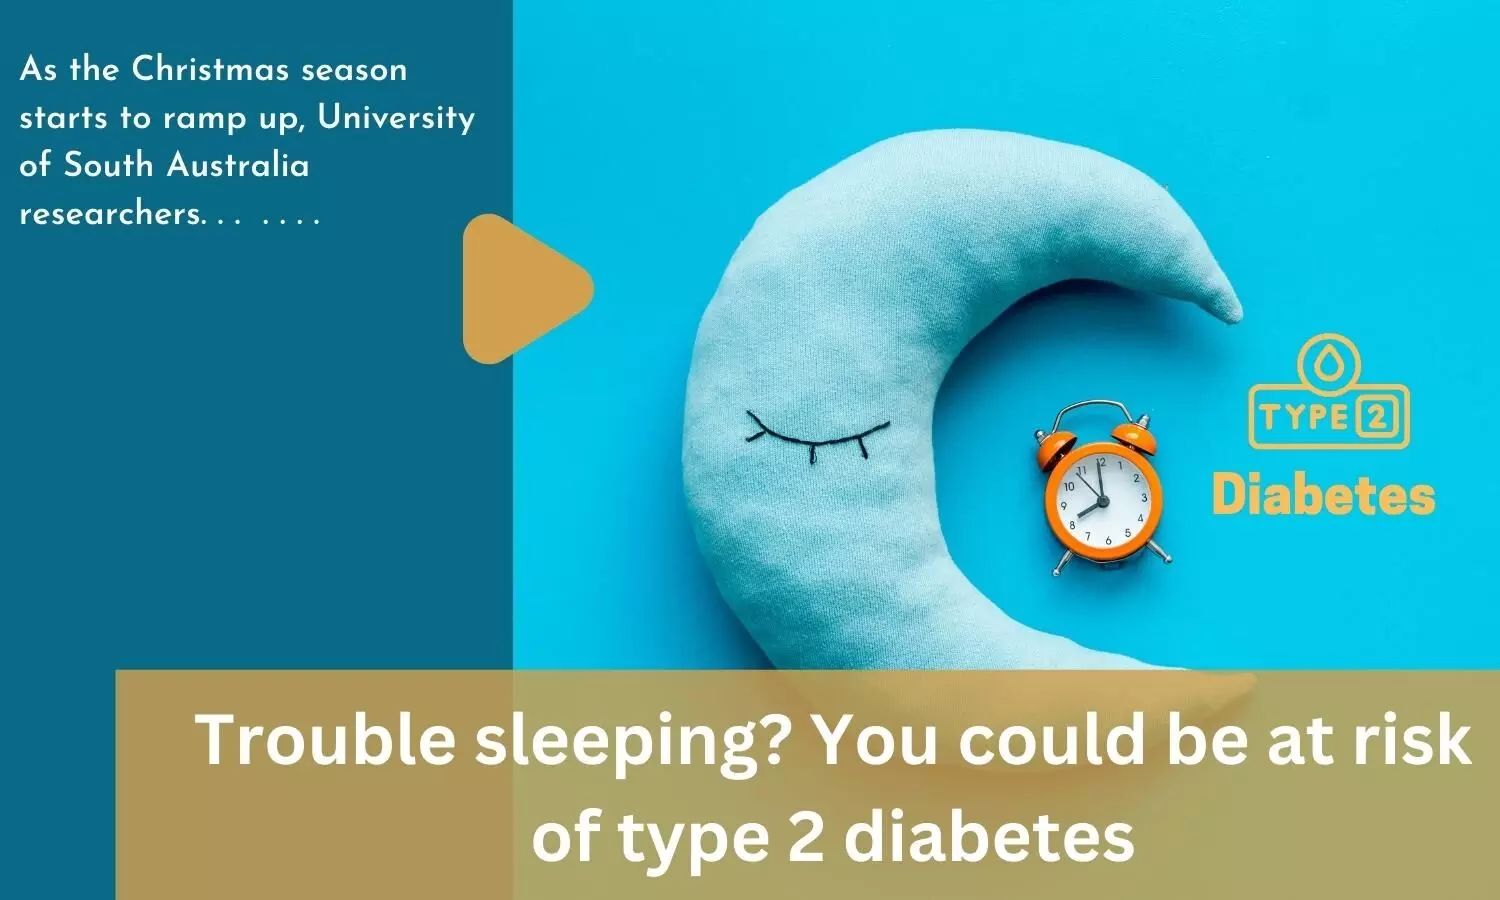 Trouble sleeping? You could be at risk of type 2 diabetes